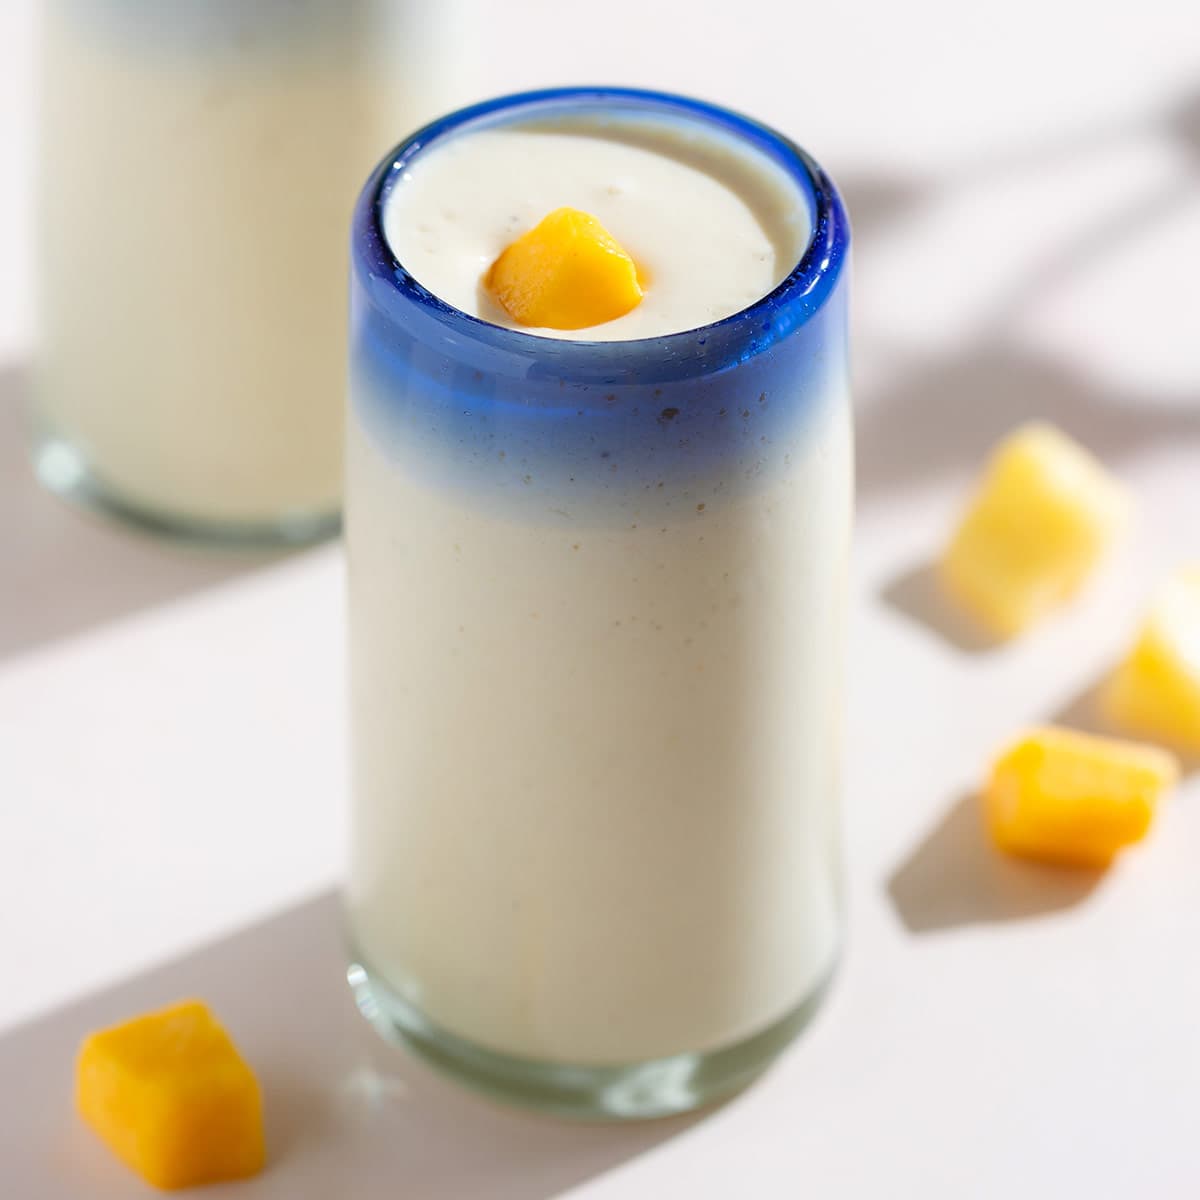 This tropical Mango Pineapple Smoothie is creamy, easy to make, and so delicious! It comes together in minutes and it can be served as a light refreshing snack or for breakfast with protein powder. #mangopineapplesmoothie thehealthfulideas.com/mango-pineappl…